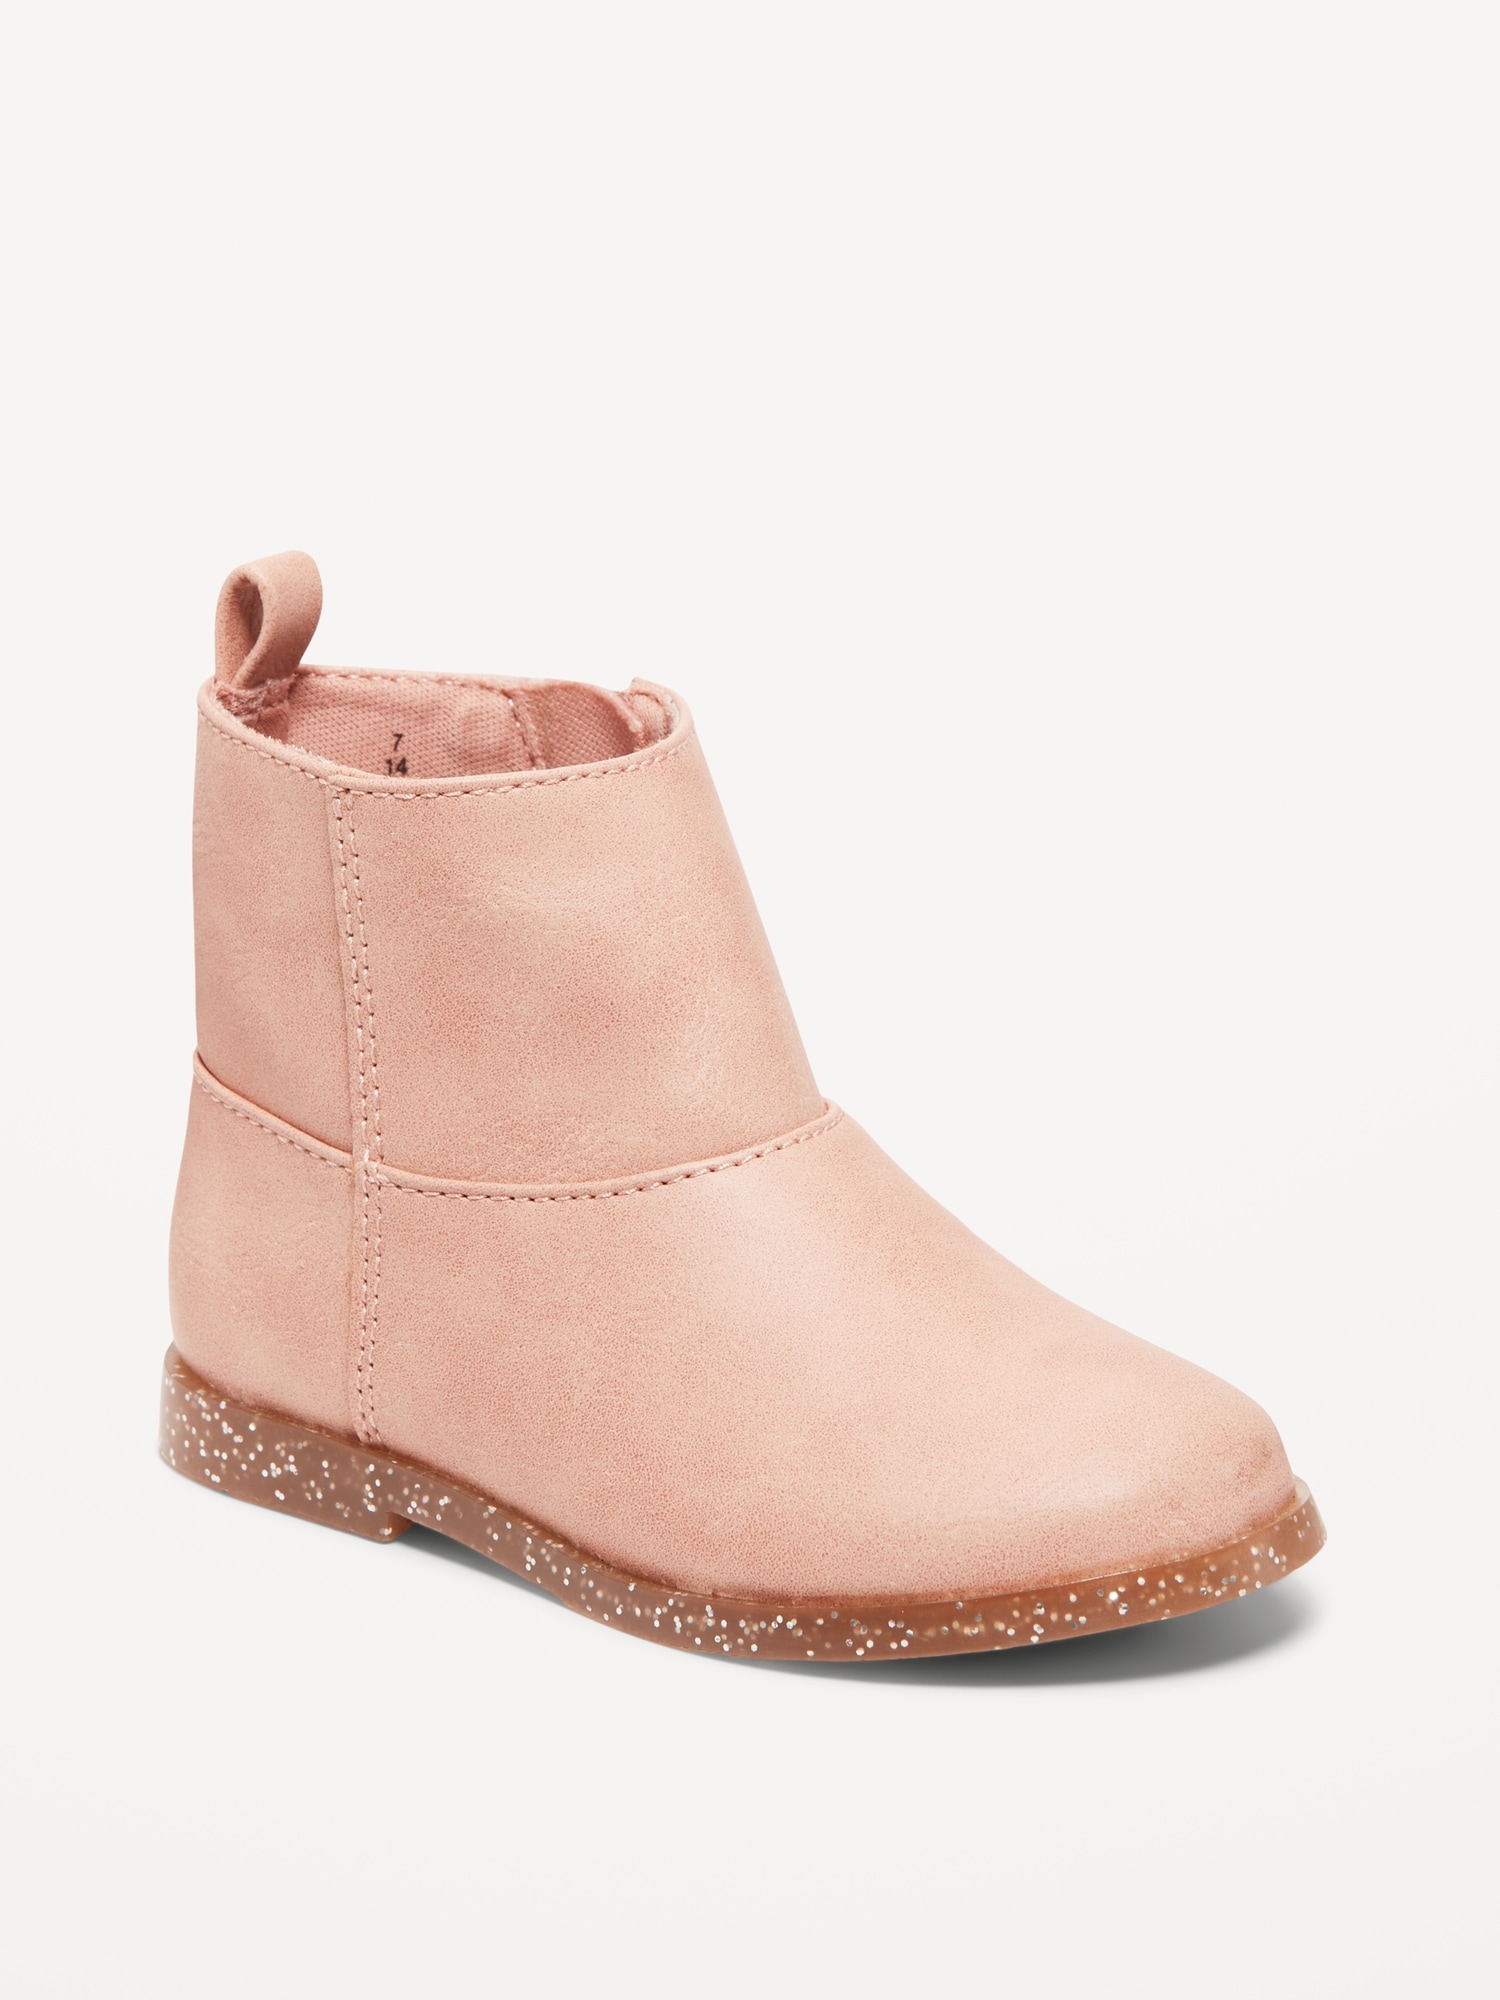 Girls' Pink Recycled Cotton High-Top Sneaker Boots - CHARLES & KEITH BE